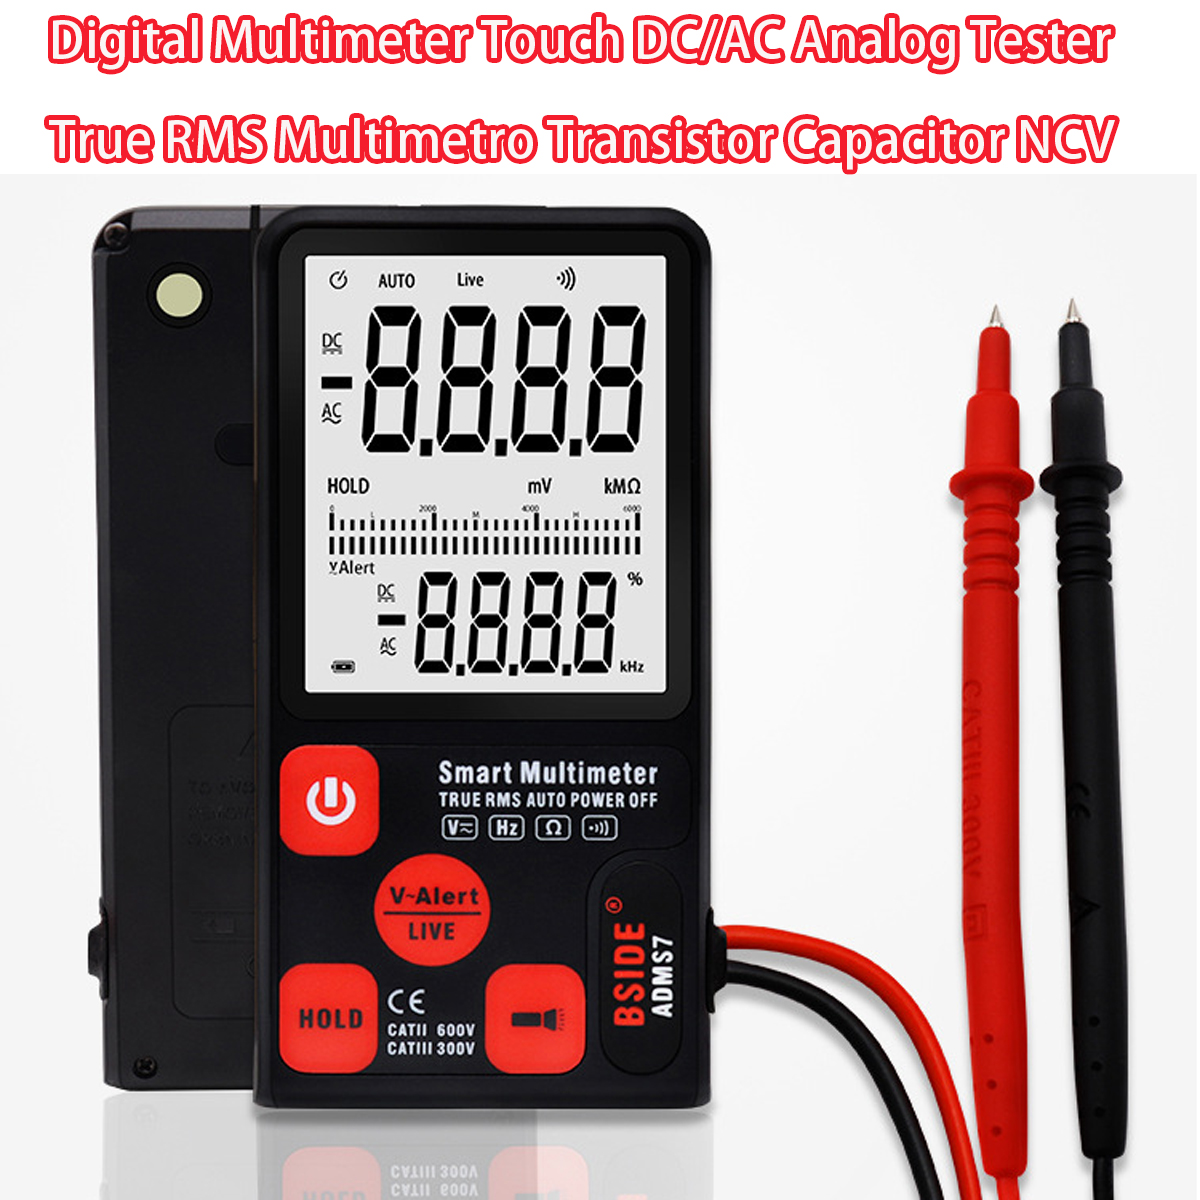 ADMS79-ADMS79-CL--Analog-Tester-Digital-Multimeter-Touch-DCAC-RMS-Multimeter-Transistor-Capacitor-1733095-5